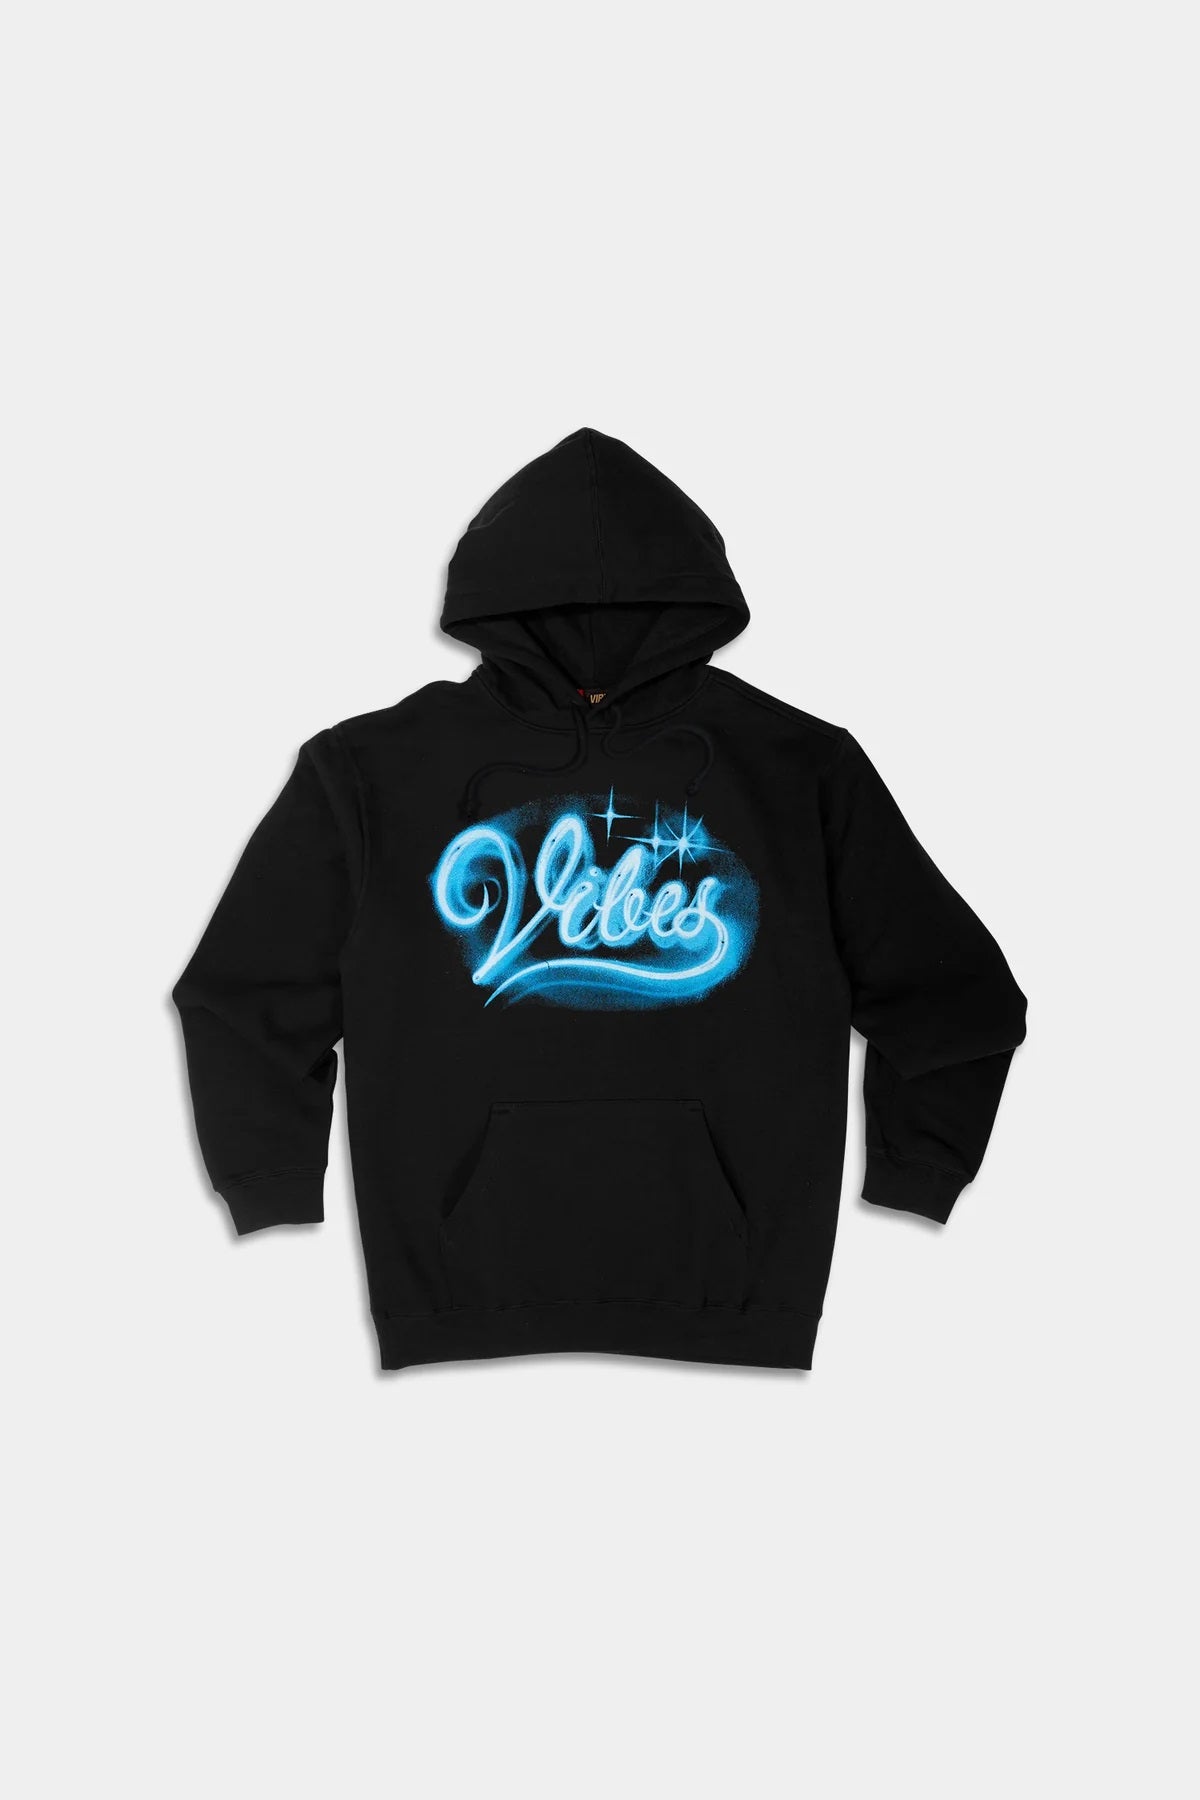 VIBES Black Air Up There Hoodie Small